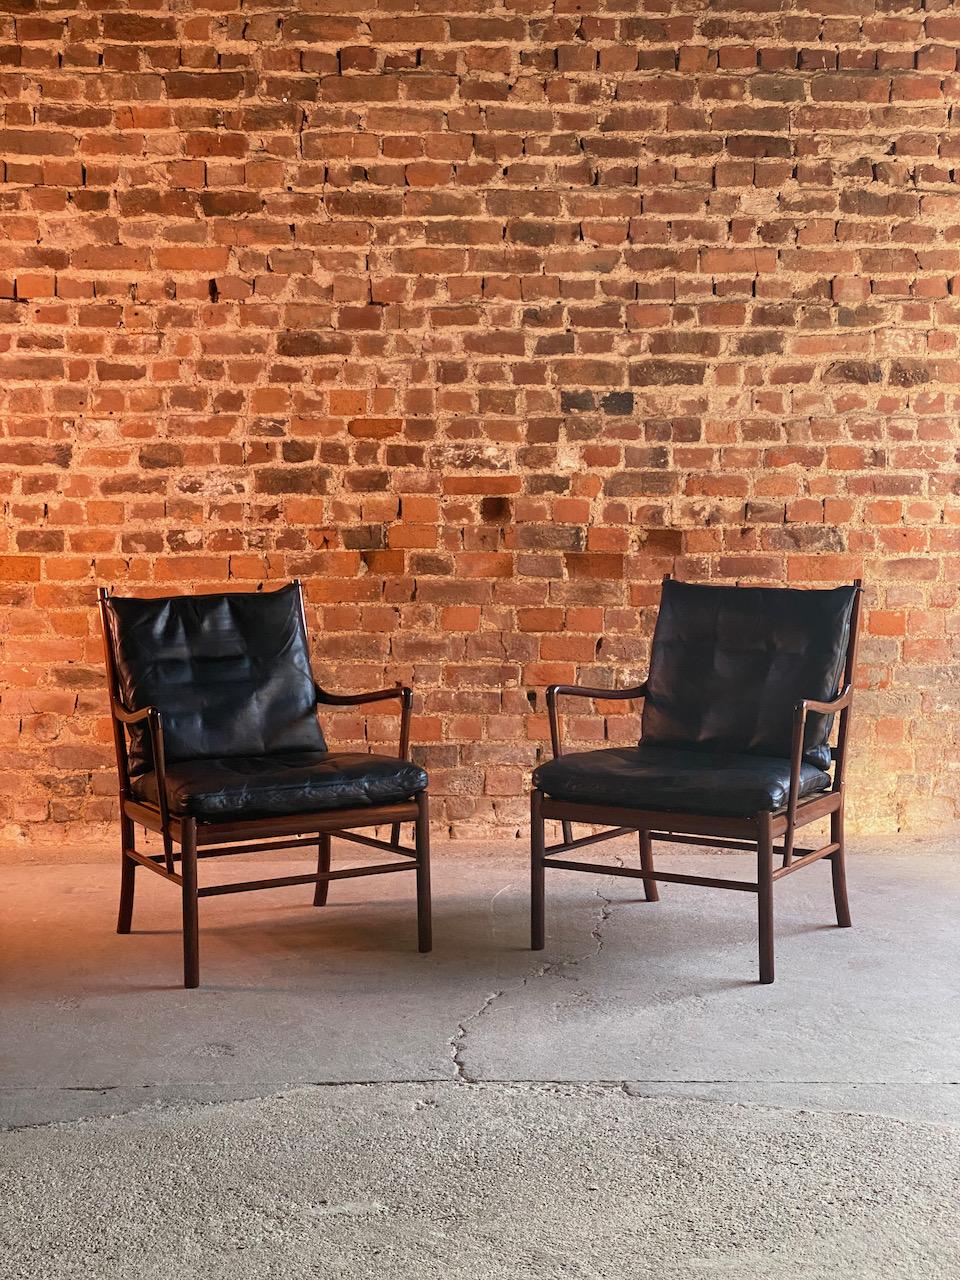 Ole Wanscher Model 149 rosewood colonial chairs by Poul Jeppesens, Denmark, circa 1950.

Magnificent pair of original mid century Ole Wanscher Model 149 'Colonial' chairs in Brazilian Rosewood for cabinet maker Poul Jeppesens Møbelfabrik, Denmark